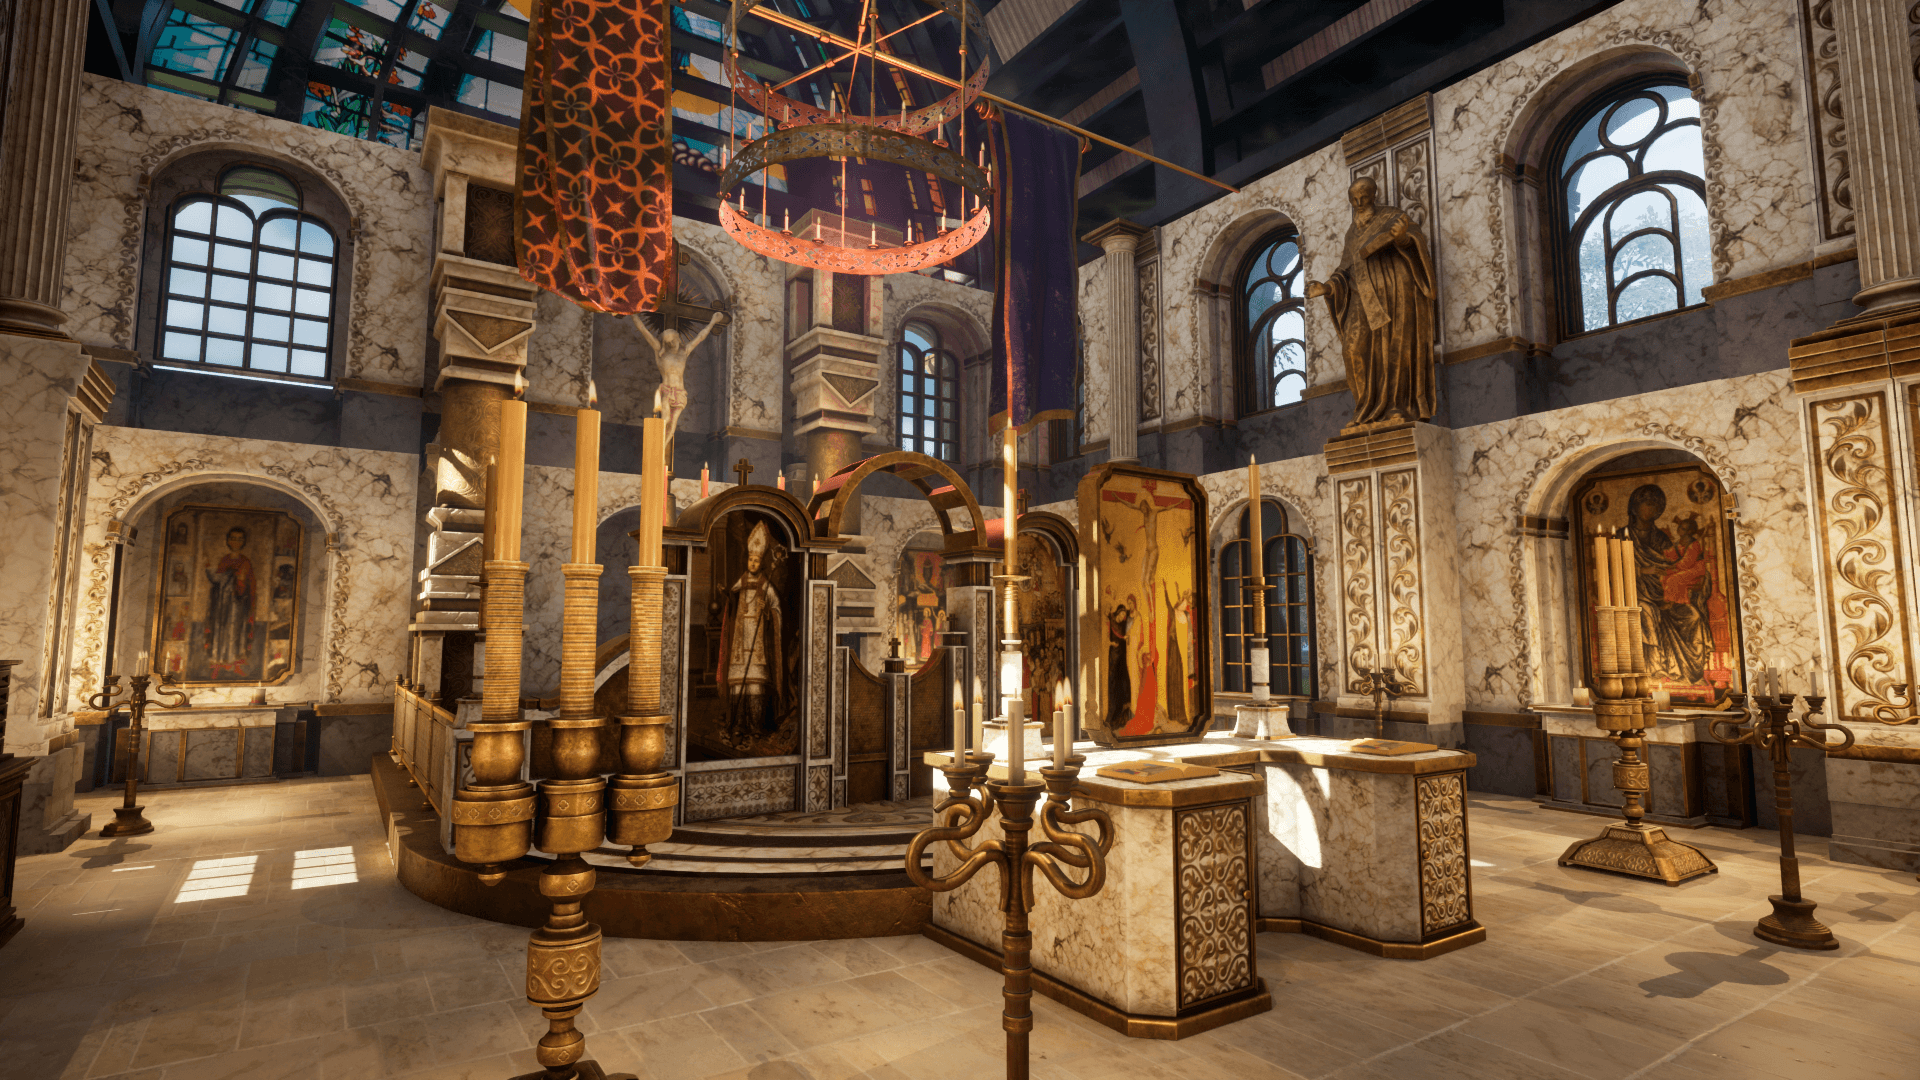 An image showing the Cathedral 3. asset pack, created with Unreal Engine